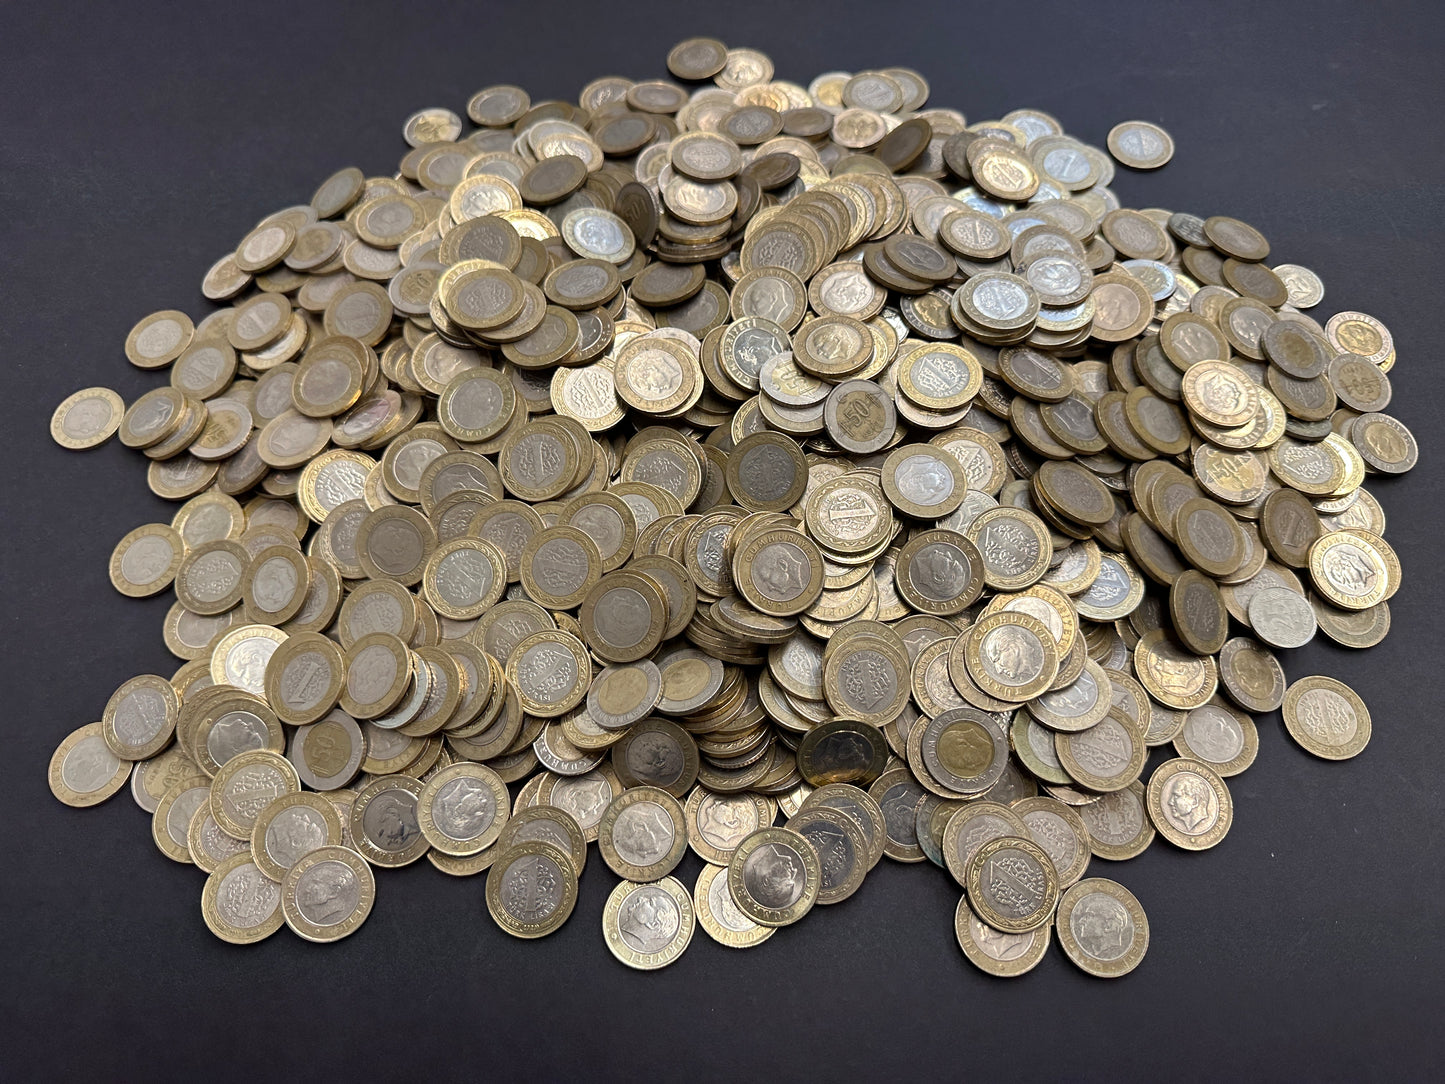 1100 Turkish Lira (approx.£28) - in coins. Perfect for tips, meals and taxis!